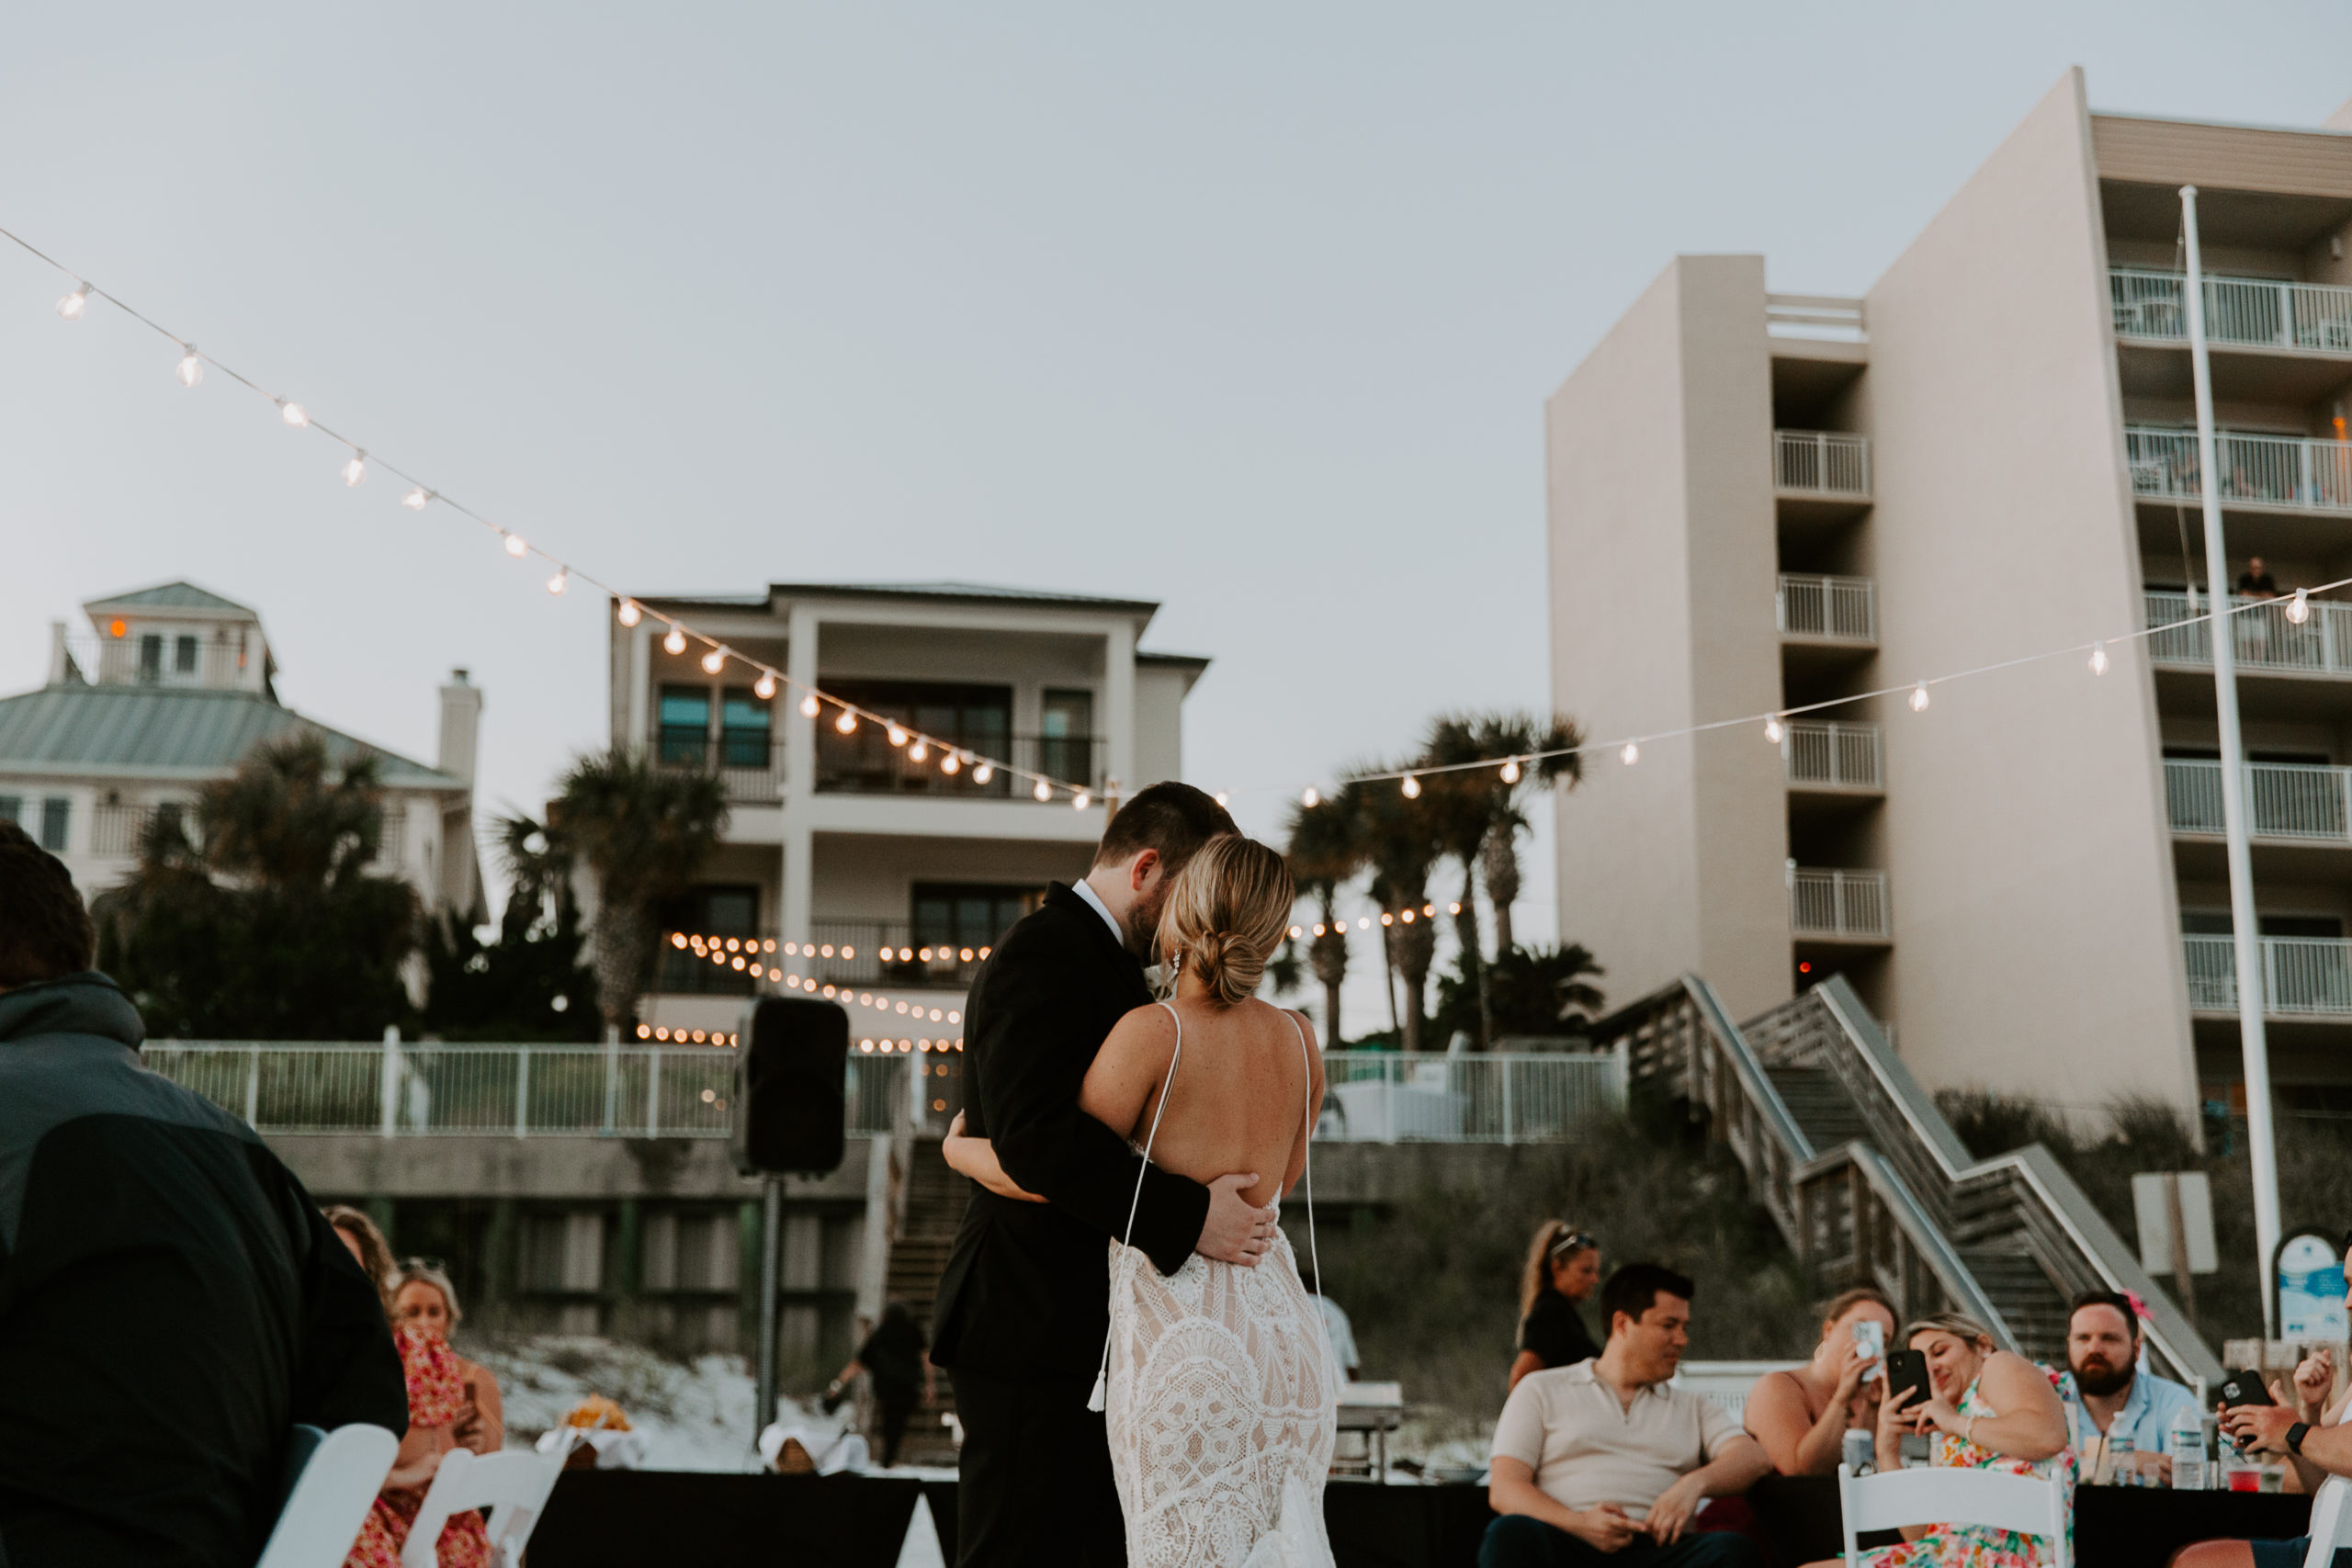 A newly wed couple sharing their first dance under twinkle lights during their beach wedding reception in Florida